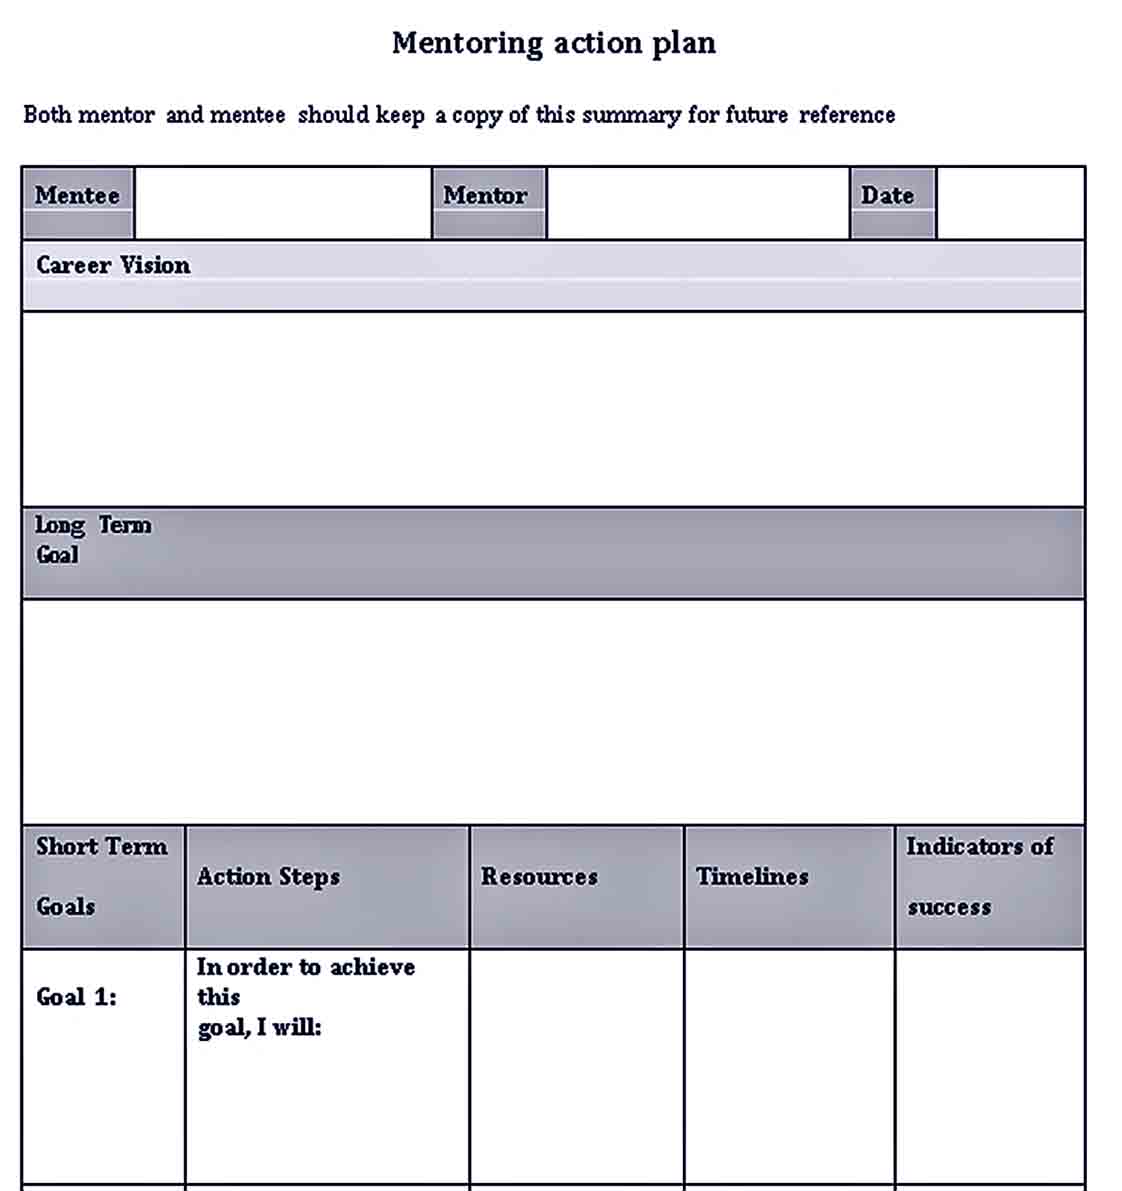 Mentoring Action Plan Templates room